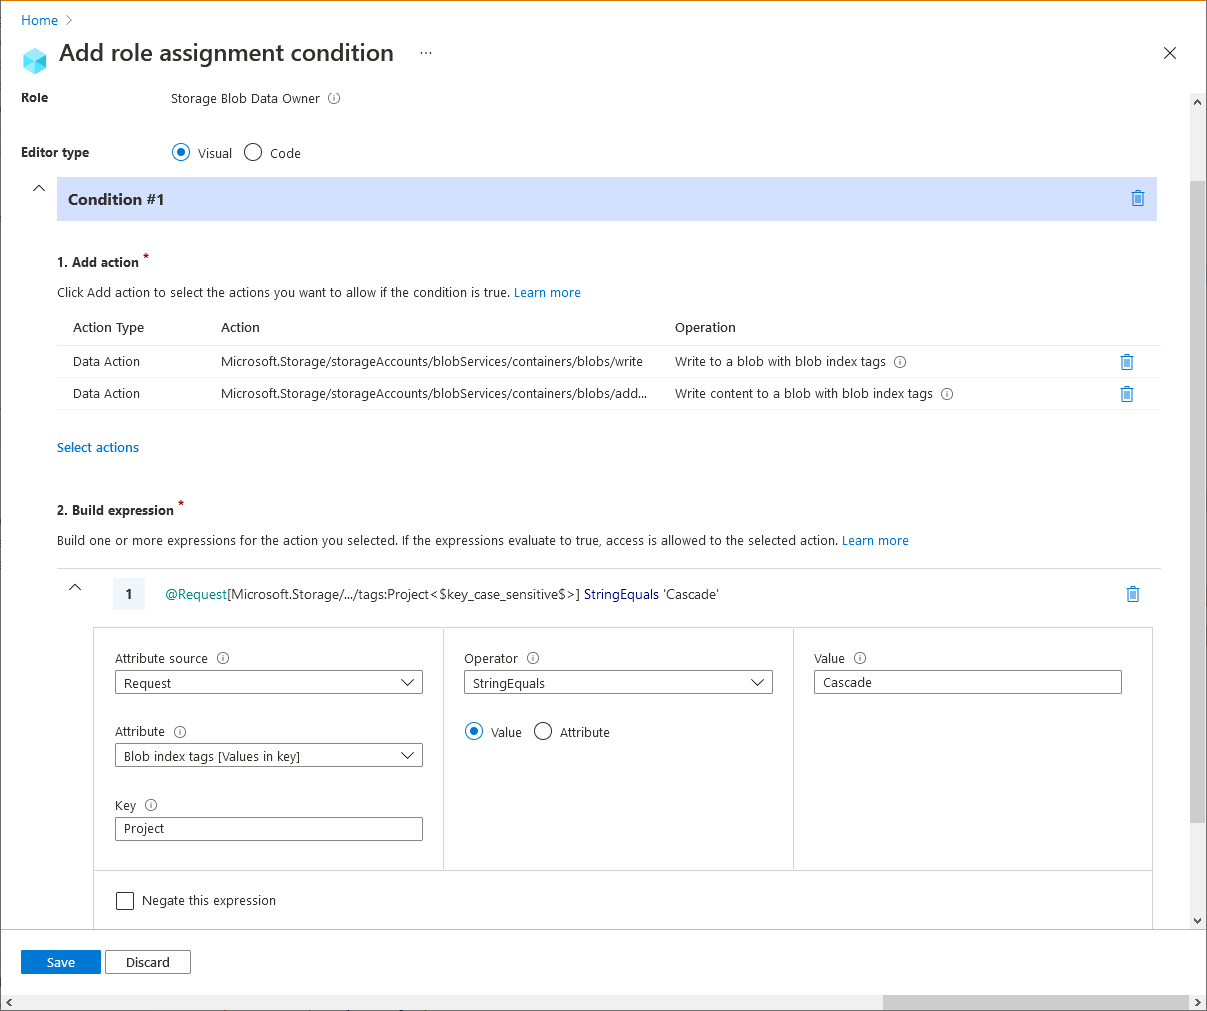 Screenshot of example 2 condition 1 editor in Azure portal.